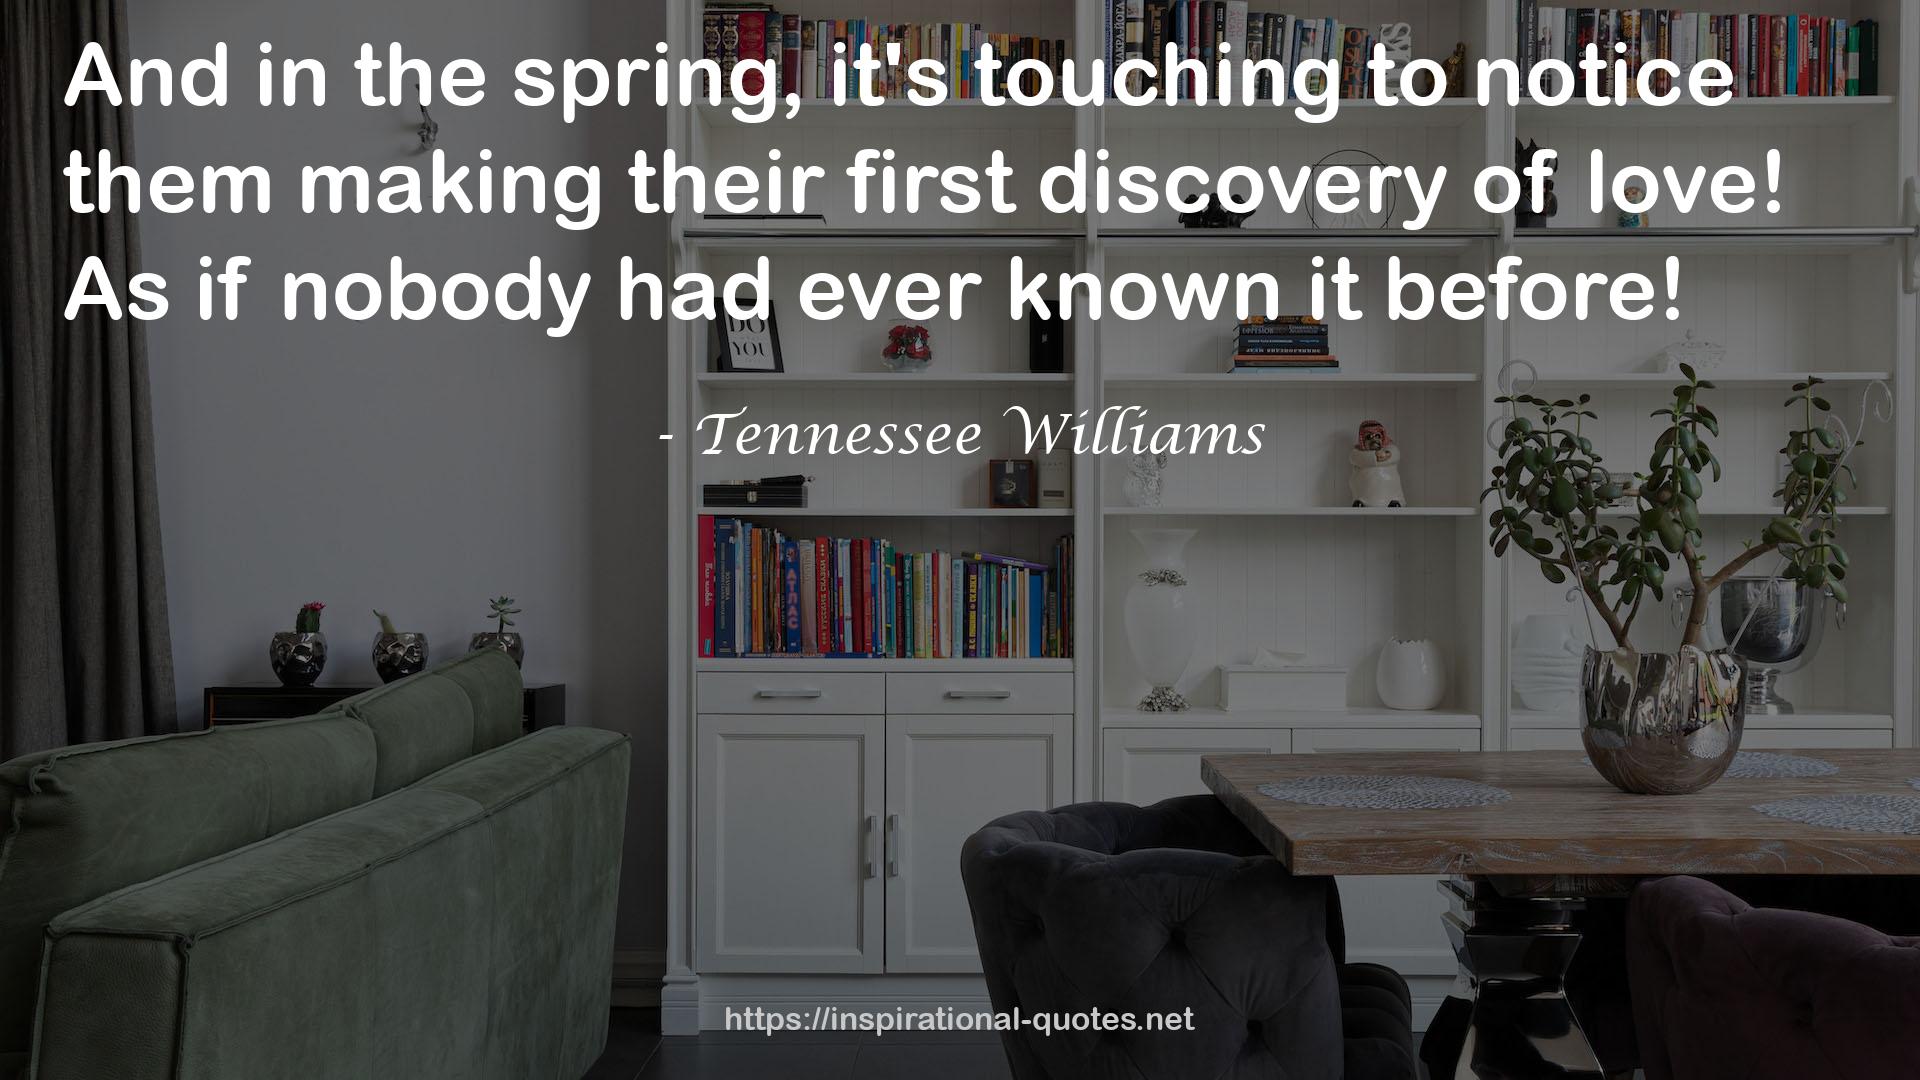 Tennessee Williams QUOTES